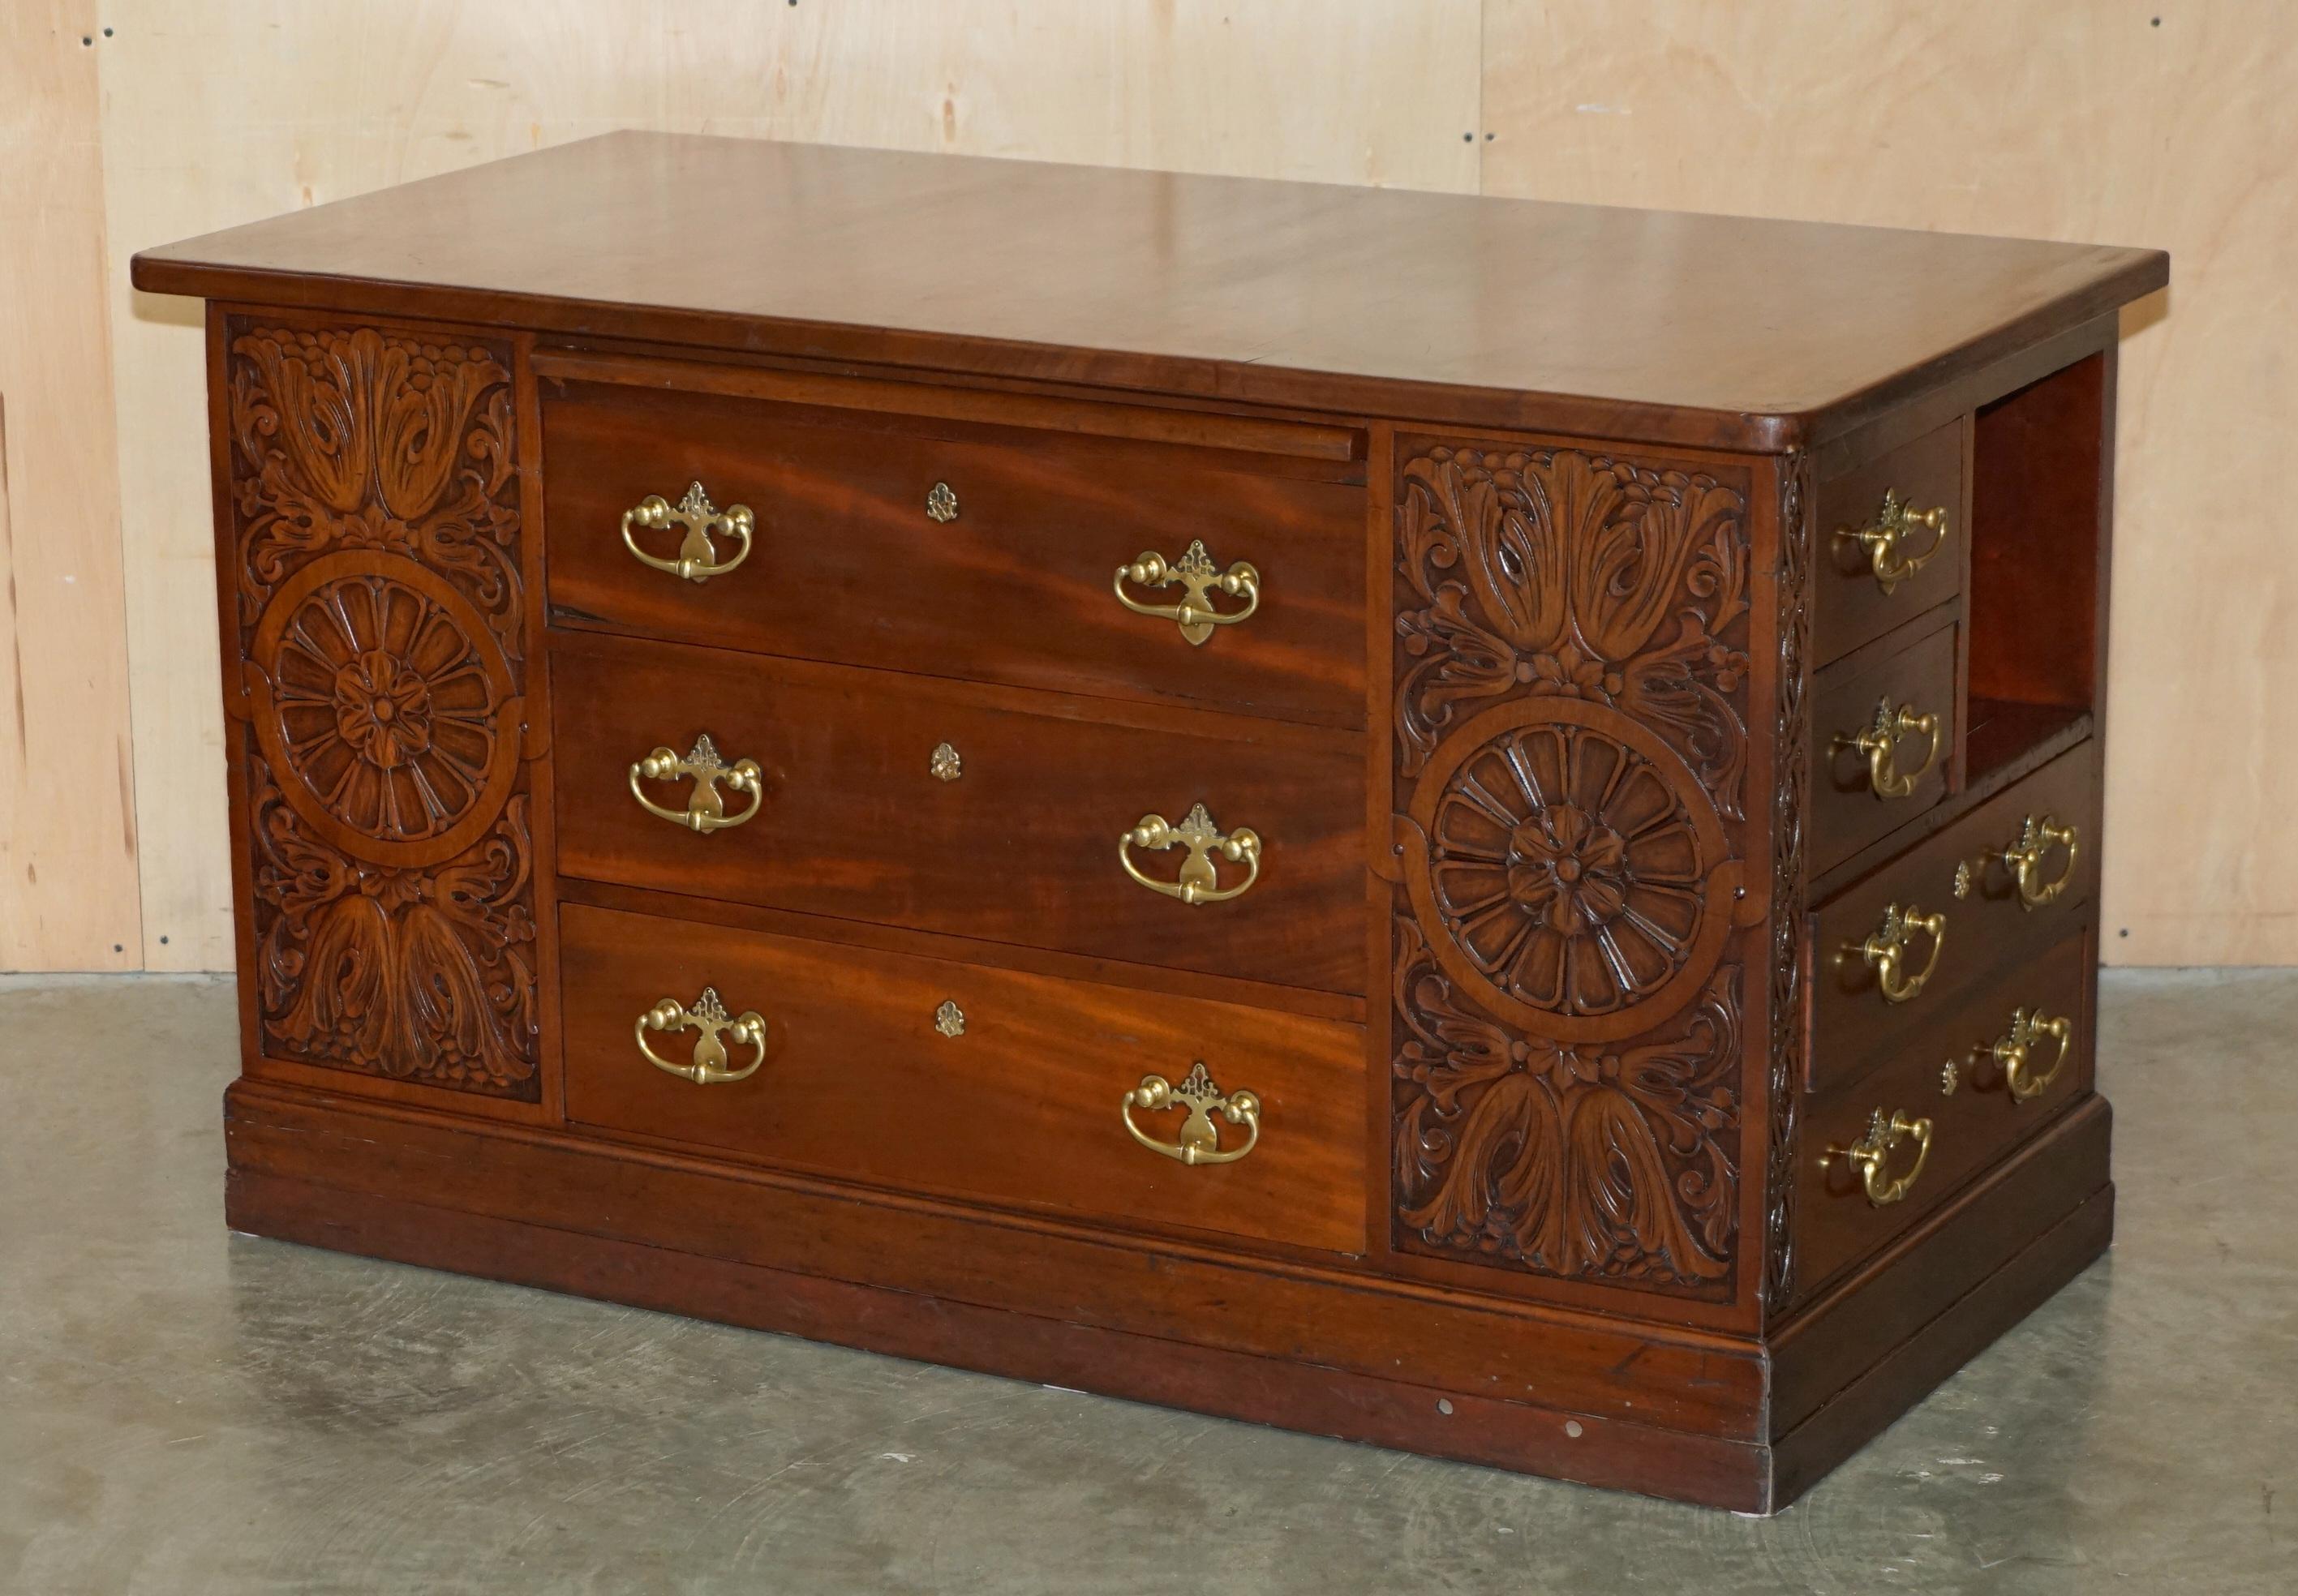 RIESIGE ANTIQUE VICTORIAN THOMAS CHIPPENDALE ESTATE DESK OR TWO SIDEBOARD DRAWERs im Angebot 7